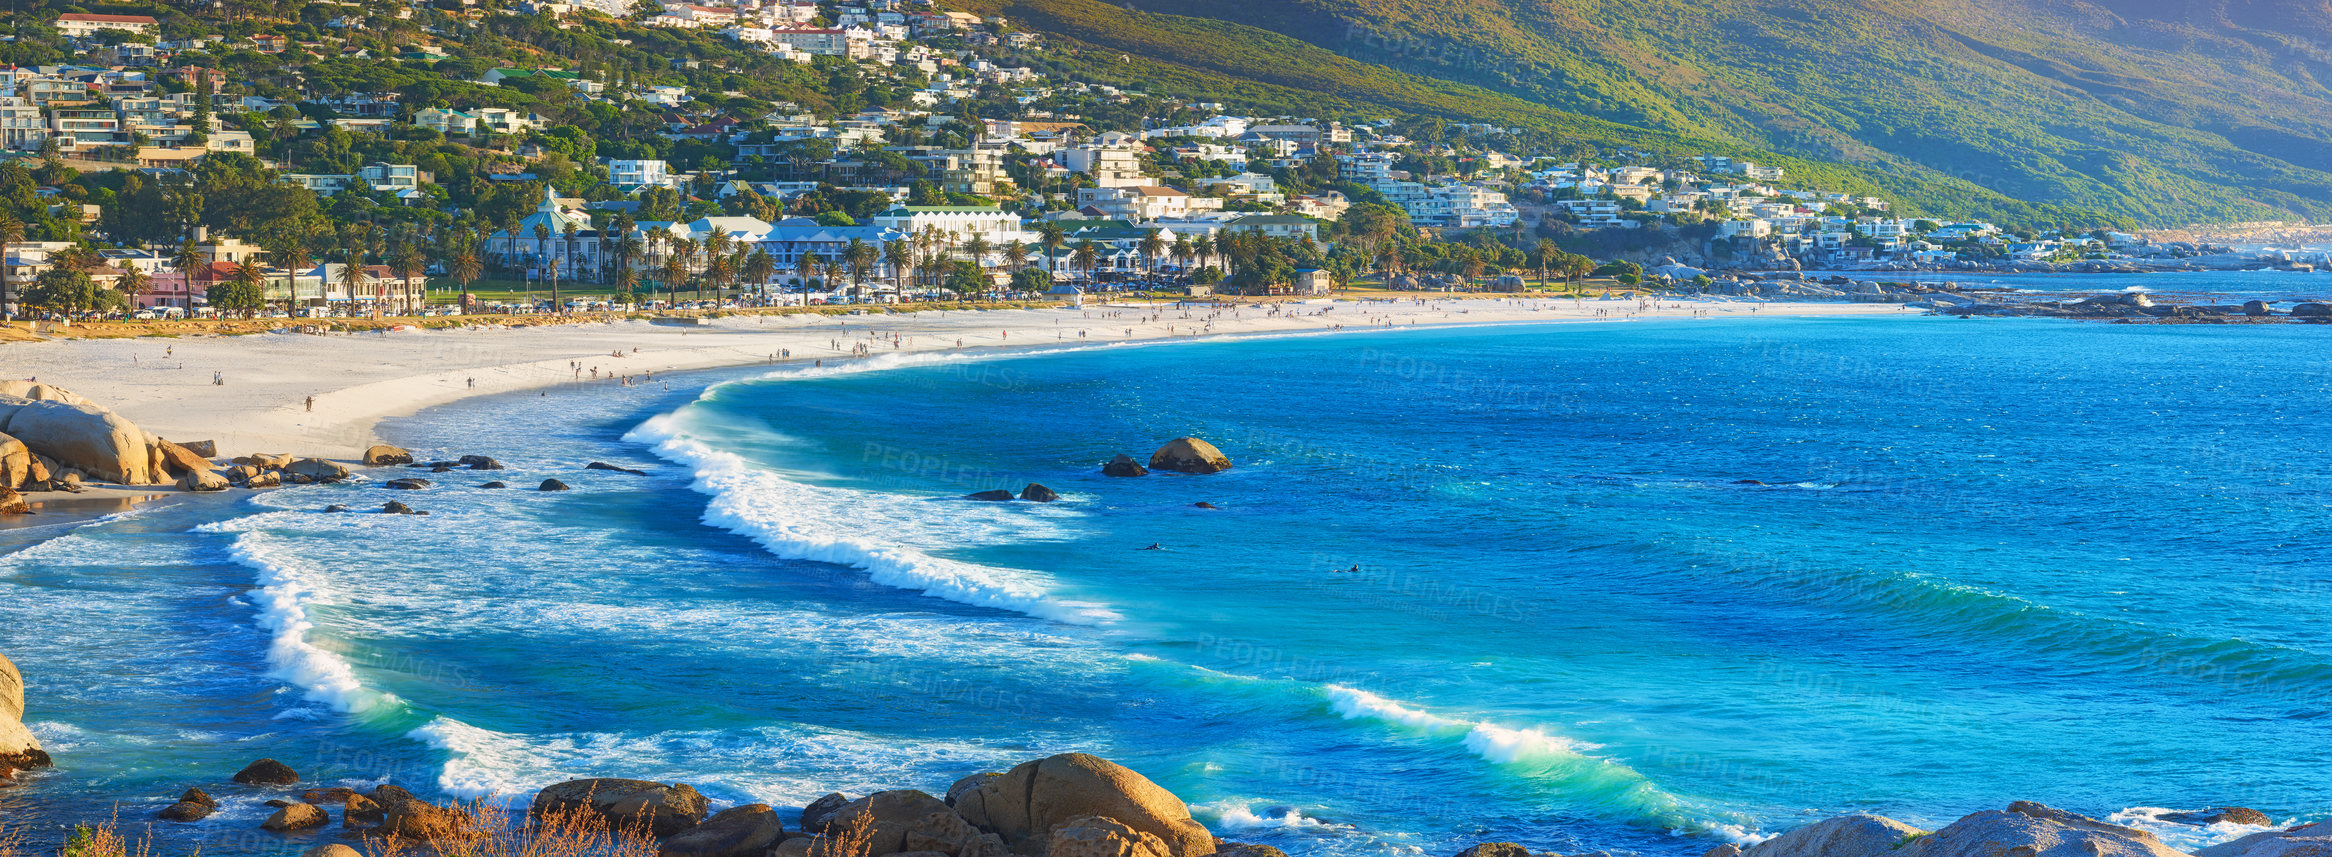 Buy stock photo Ocean view of Camps Bay, Table Mountain National Park, Cape Town, South Africa. Panorama seascape boulders and rocks in the ocean and sea waves washing onto a rocky shore. Popular tourism beach